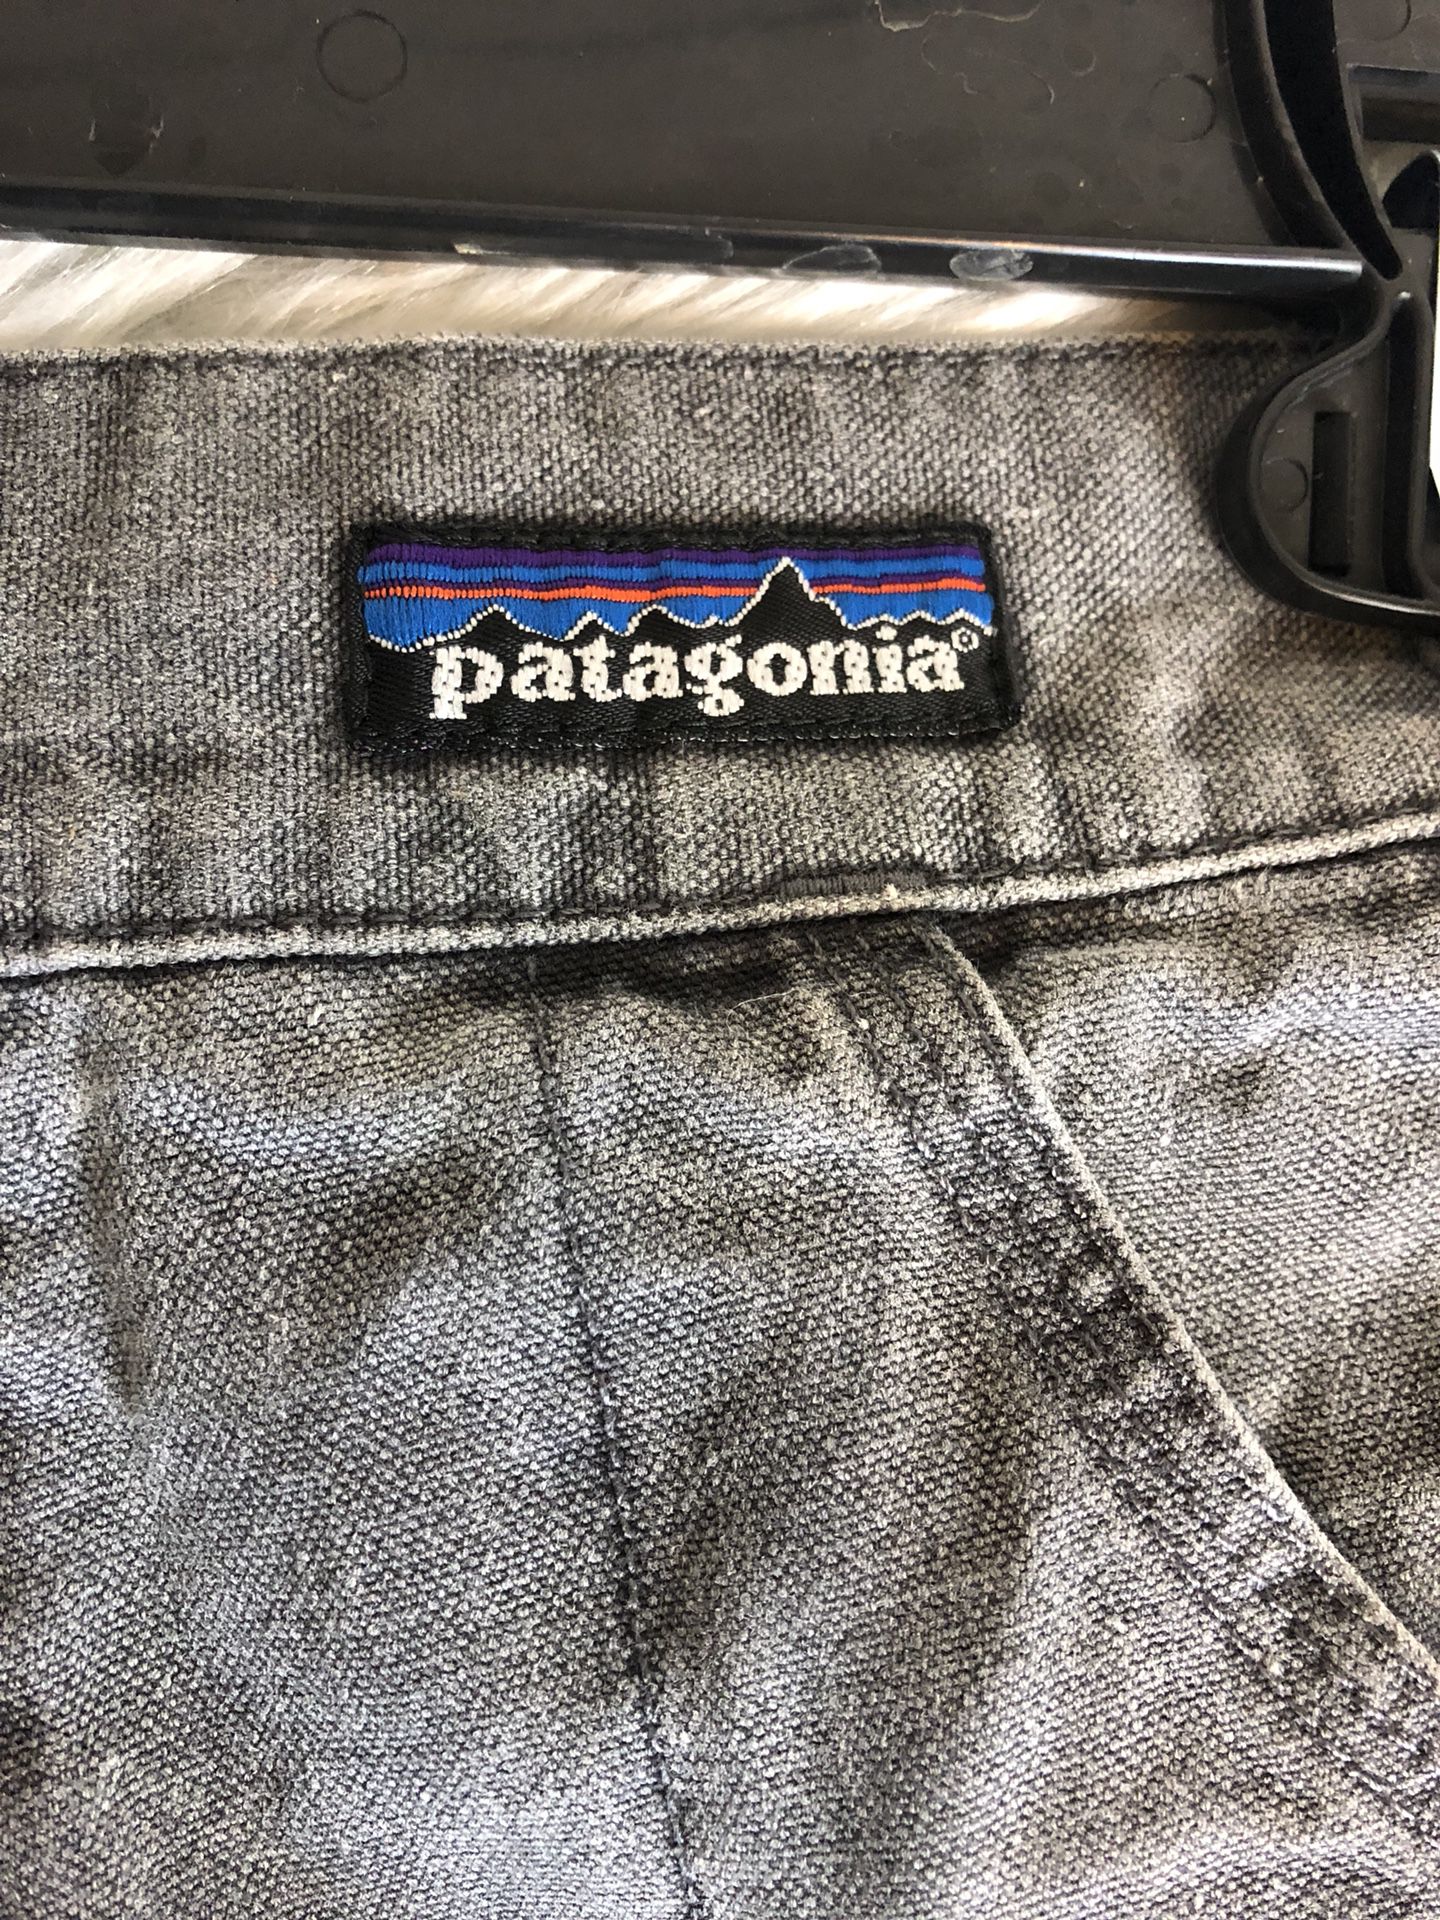 Vntg patagonia hiking double knee stand up pants. “36